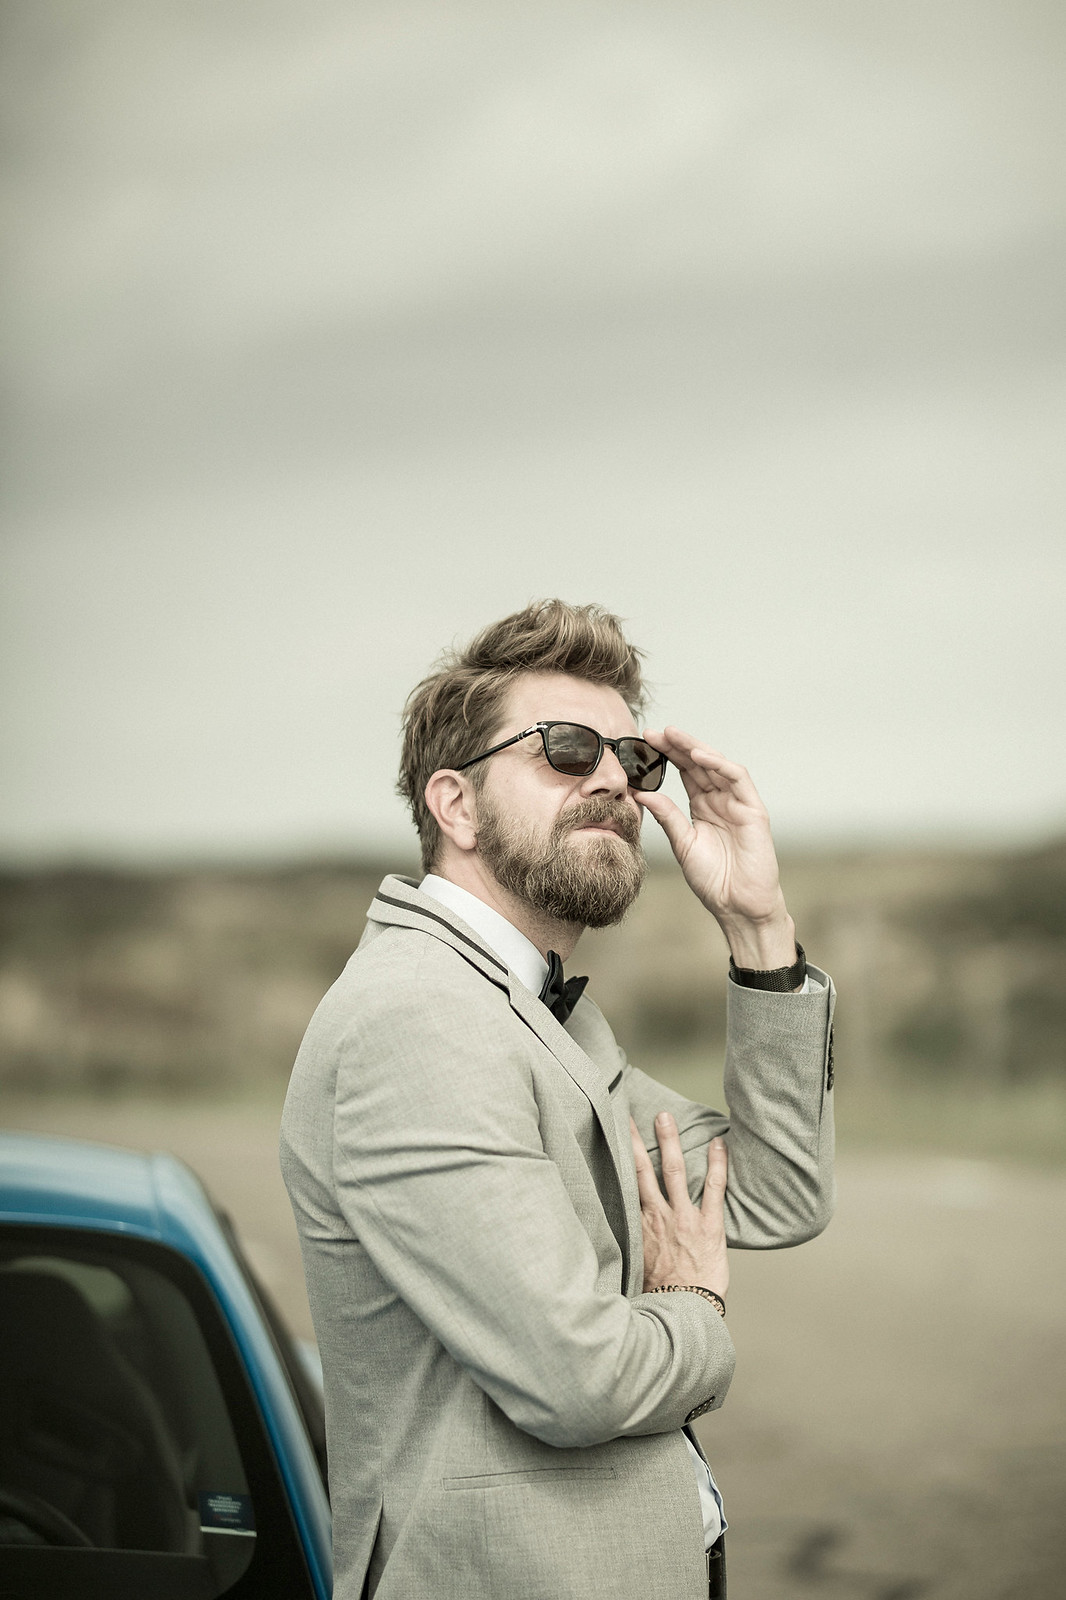 max outfit lookbook dandy chic gentleman modern style grey suit zaraman dapper persol sunglasses chic going out wedding ford mustang pony car max bechmann fotografie film düsseldorf nrw germany germanblogger maleblogger männerstyle modeblog cats & dogs 3